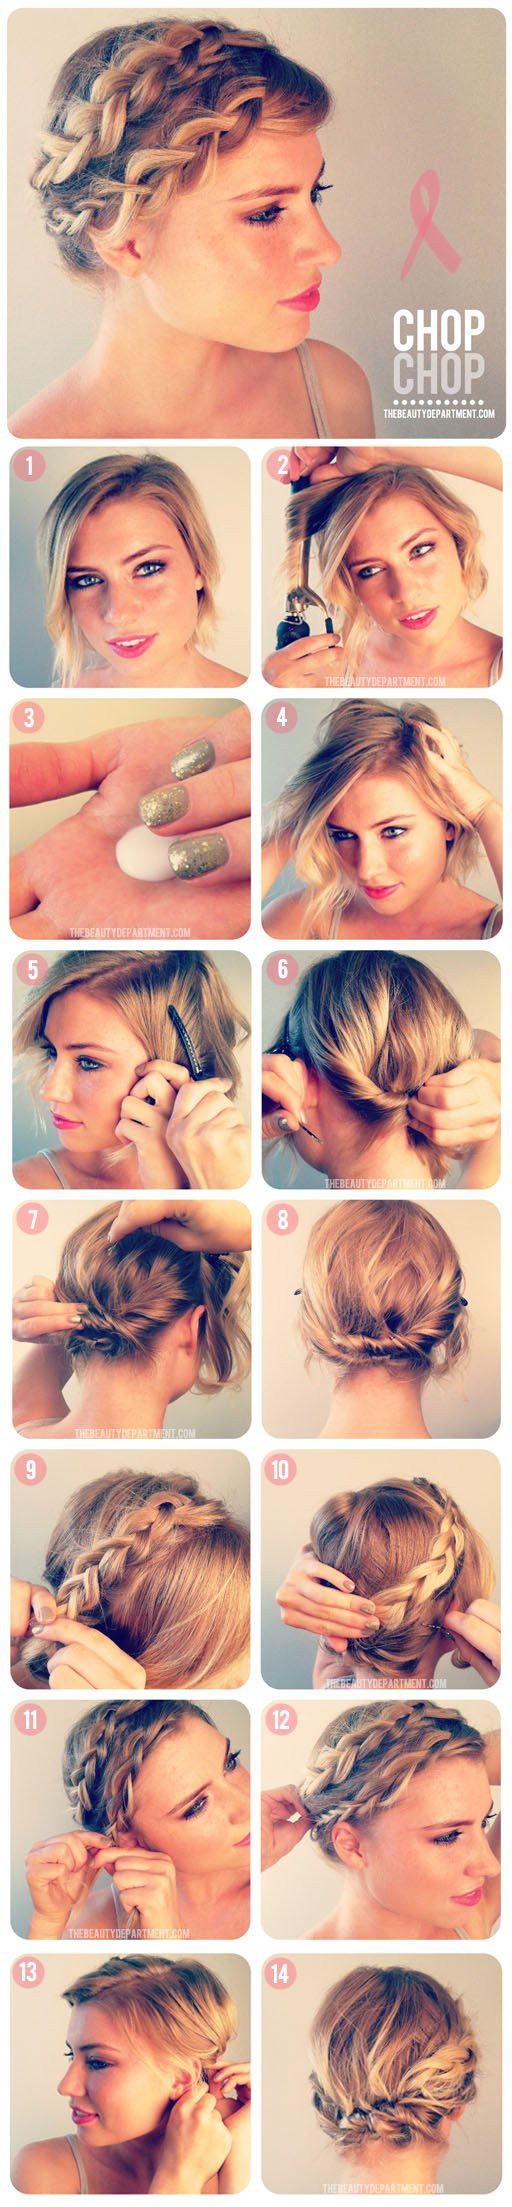 DIY Hairstyle For Short Hair
 17 Easy DIY Tutorials For Glamorous and Cute Hairstyle